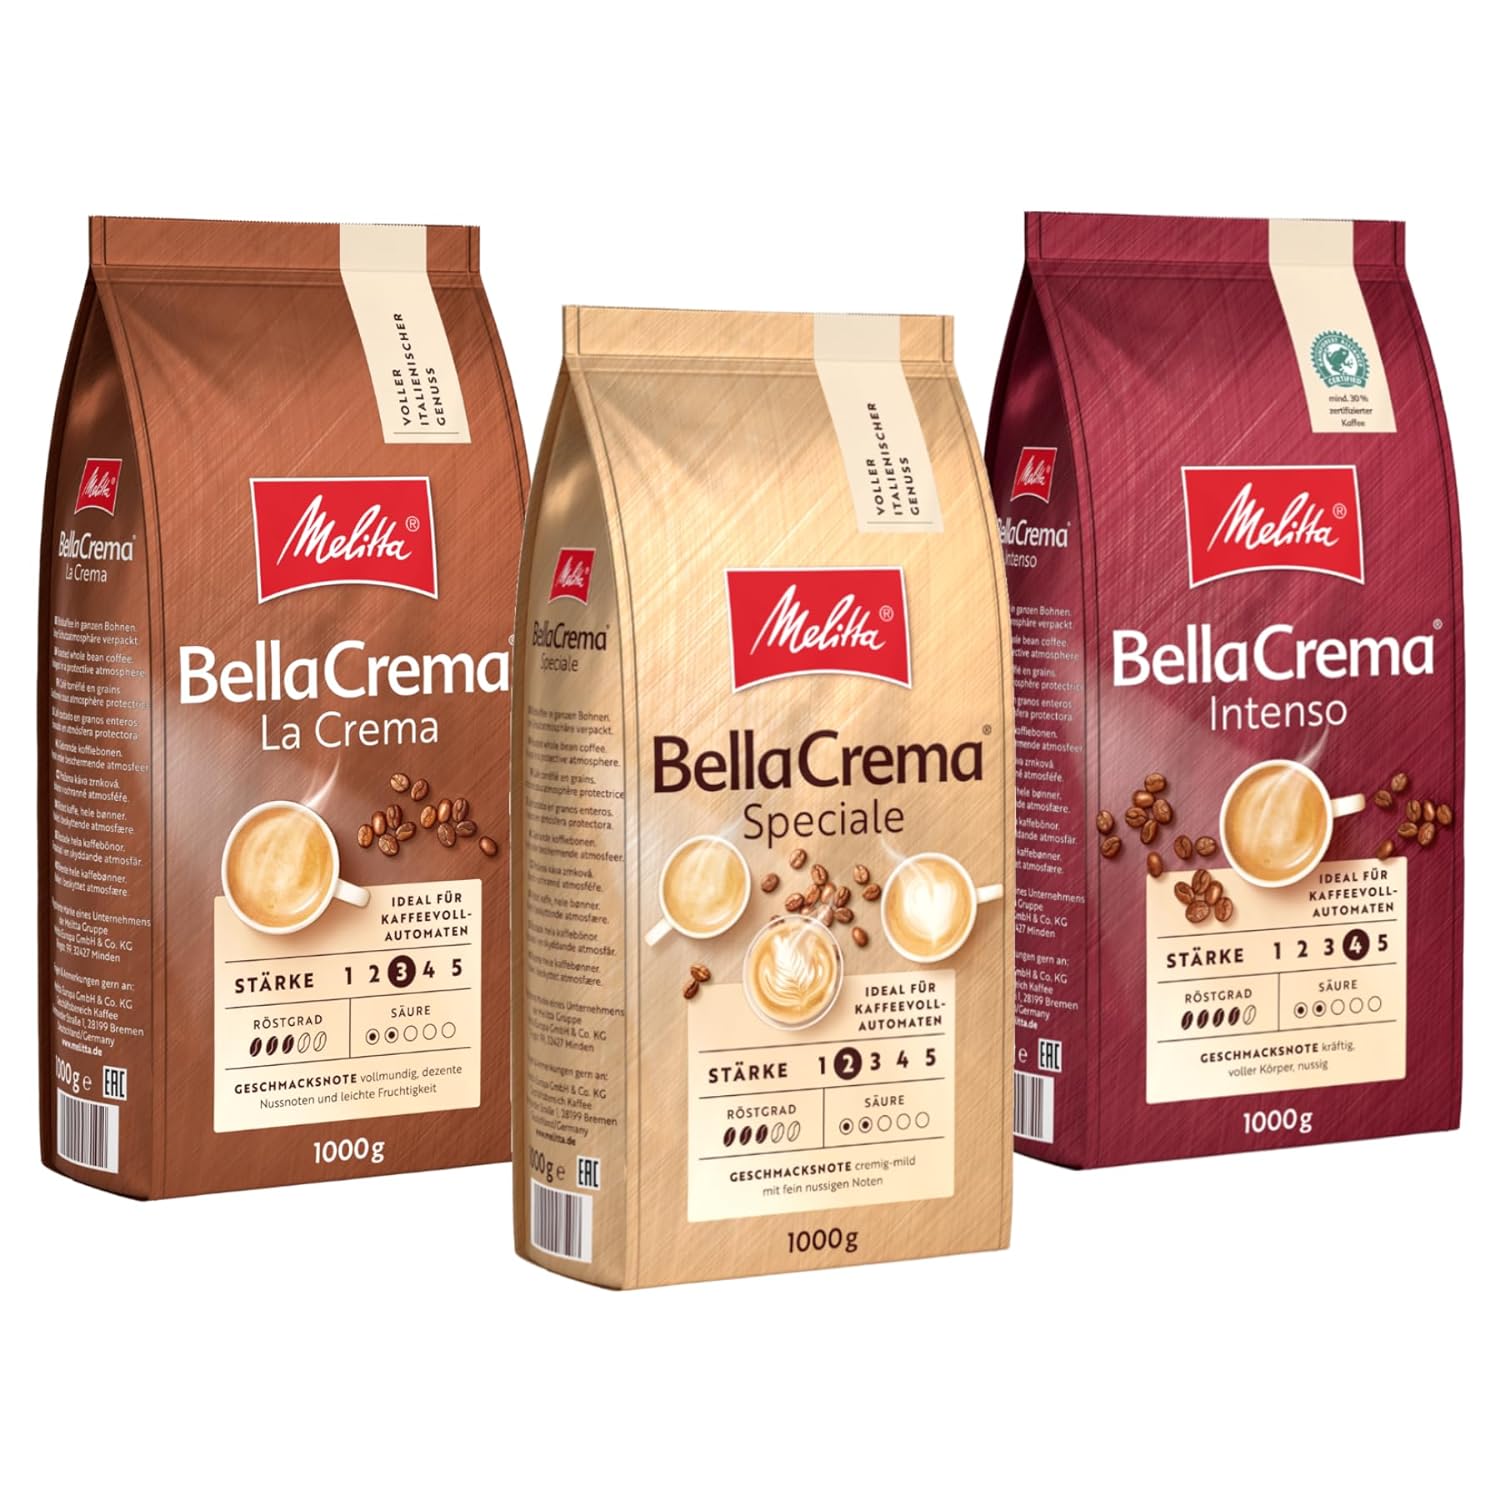 Melitta Bellacrema Tasting Package La Crema Speciale Intenso Whole coffee beans 3 x 1kg, uncomfortable, coffee beans for fully automatic coffee machine, roasted in Germany